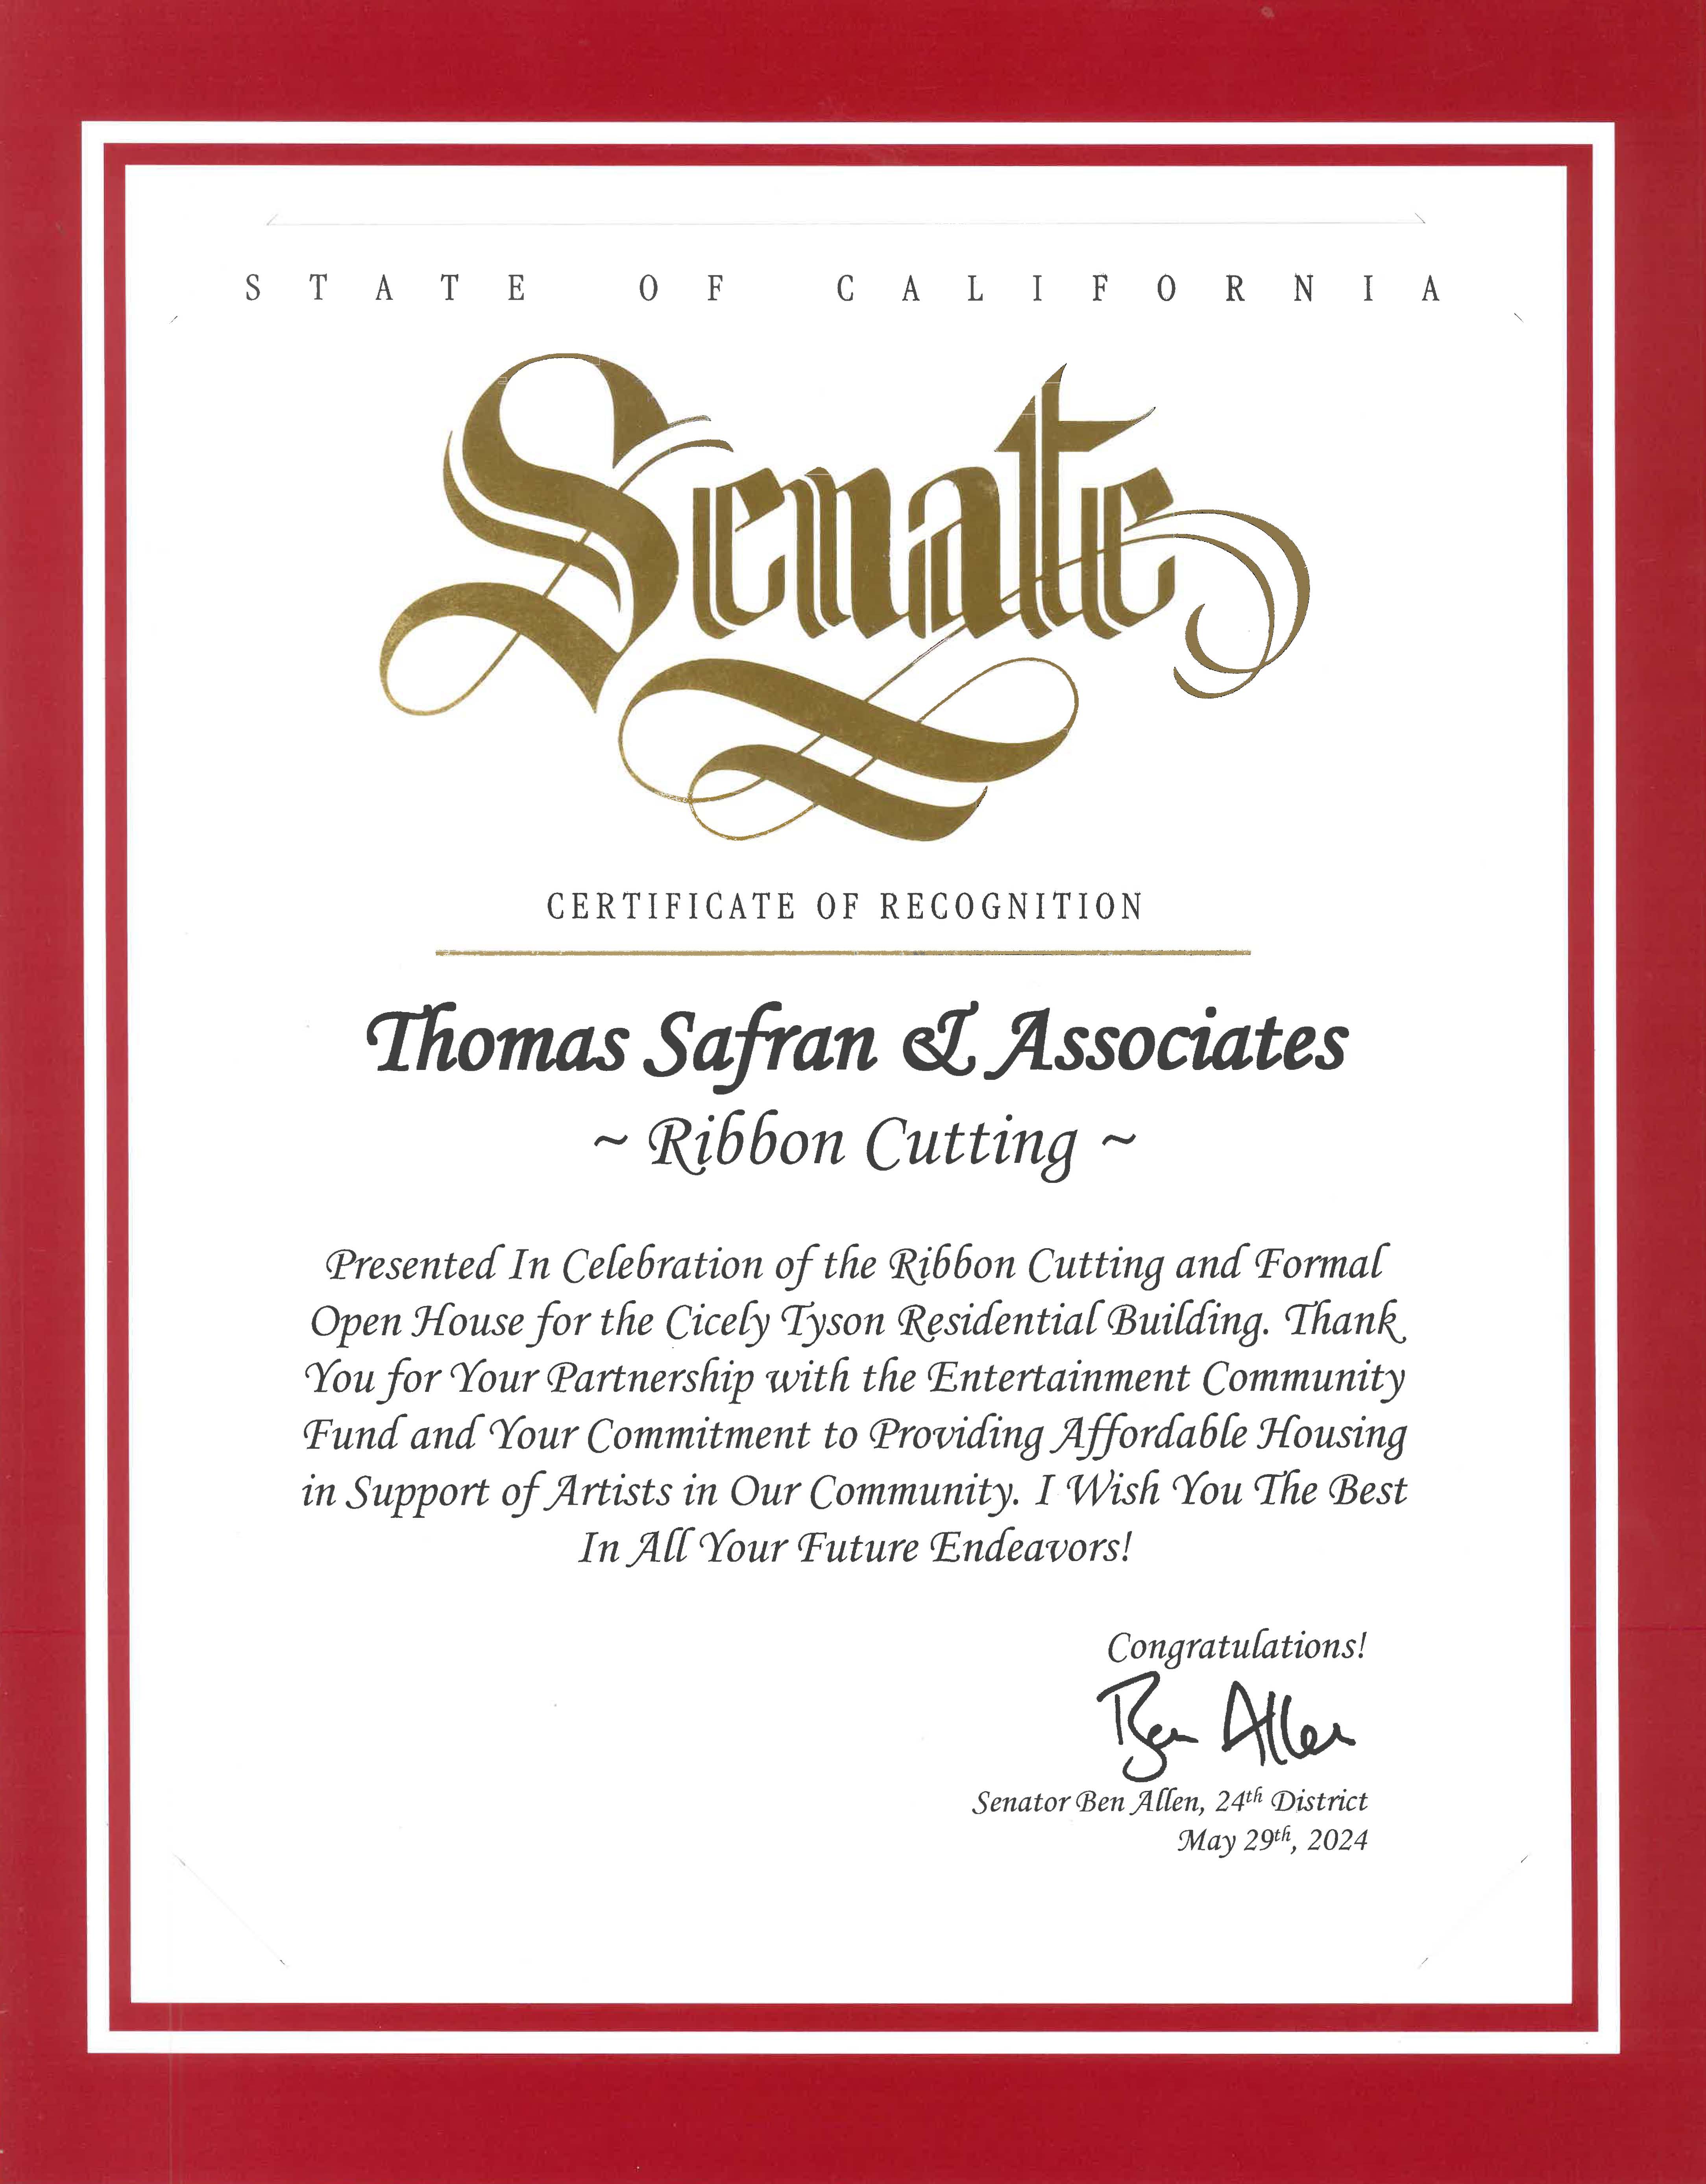 State of California Senate - Certificate of Recognition 2024 - 
Hollywood Arts Collective